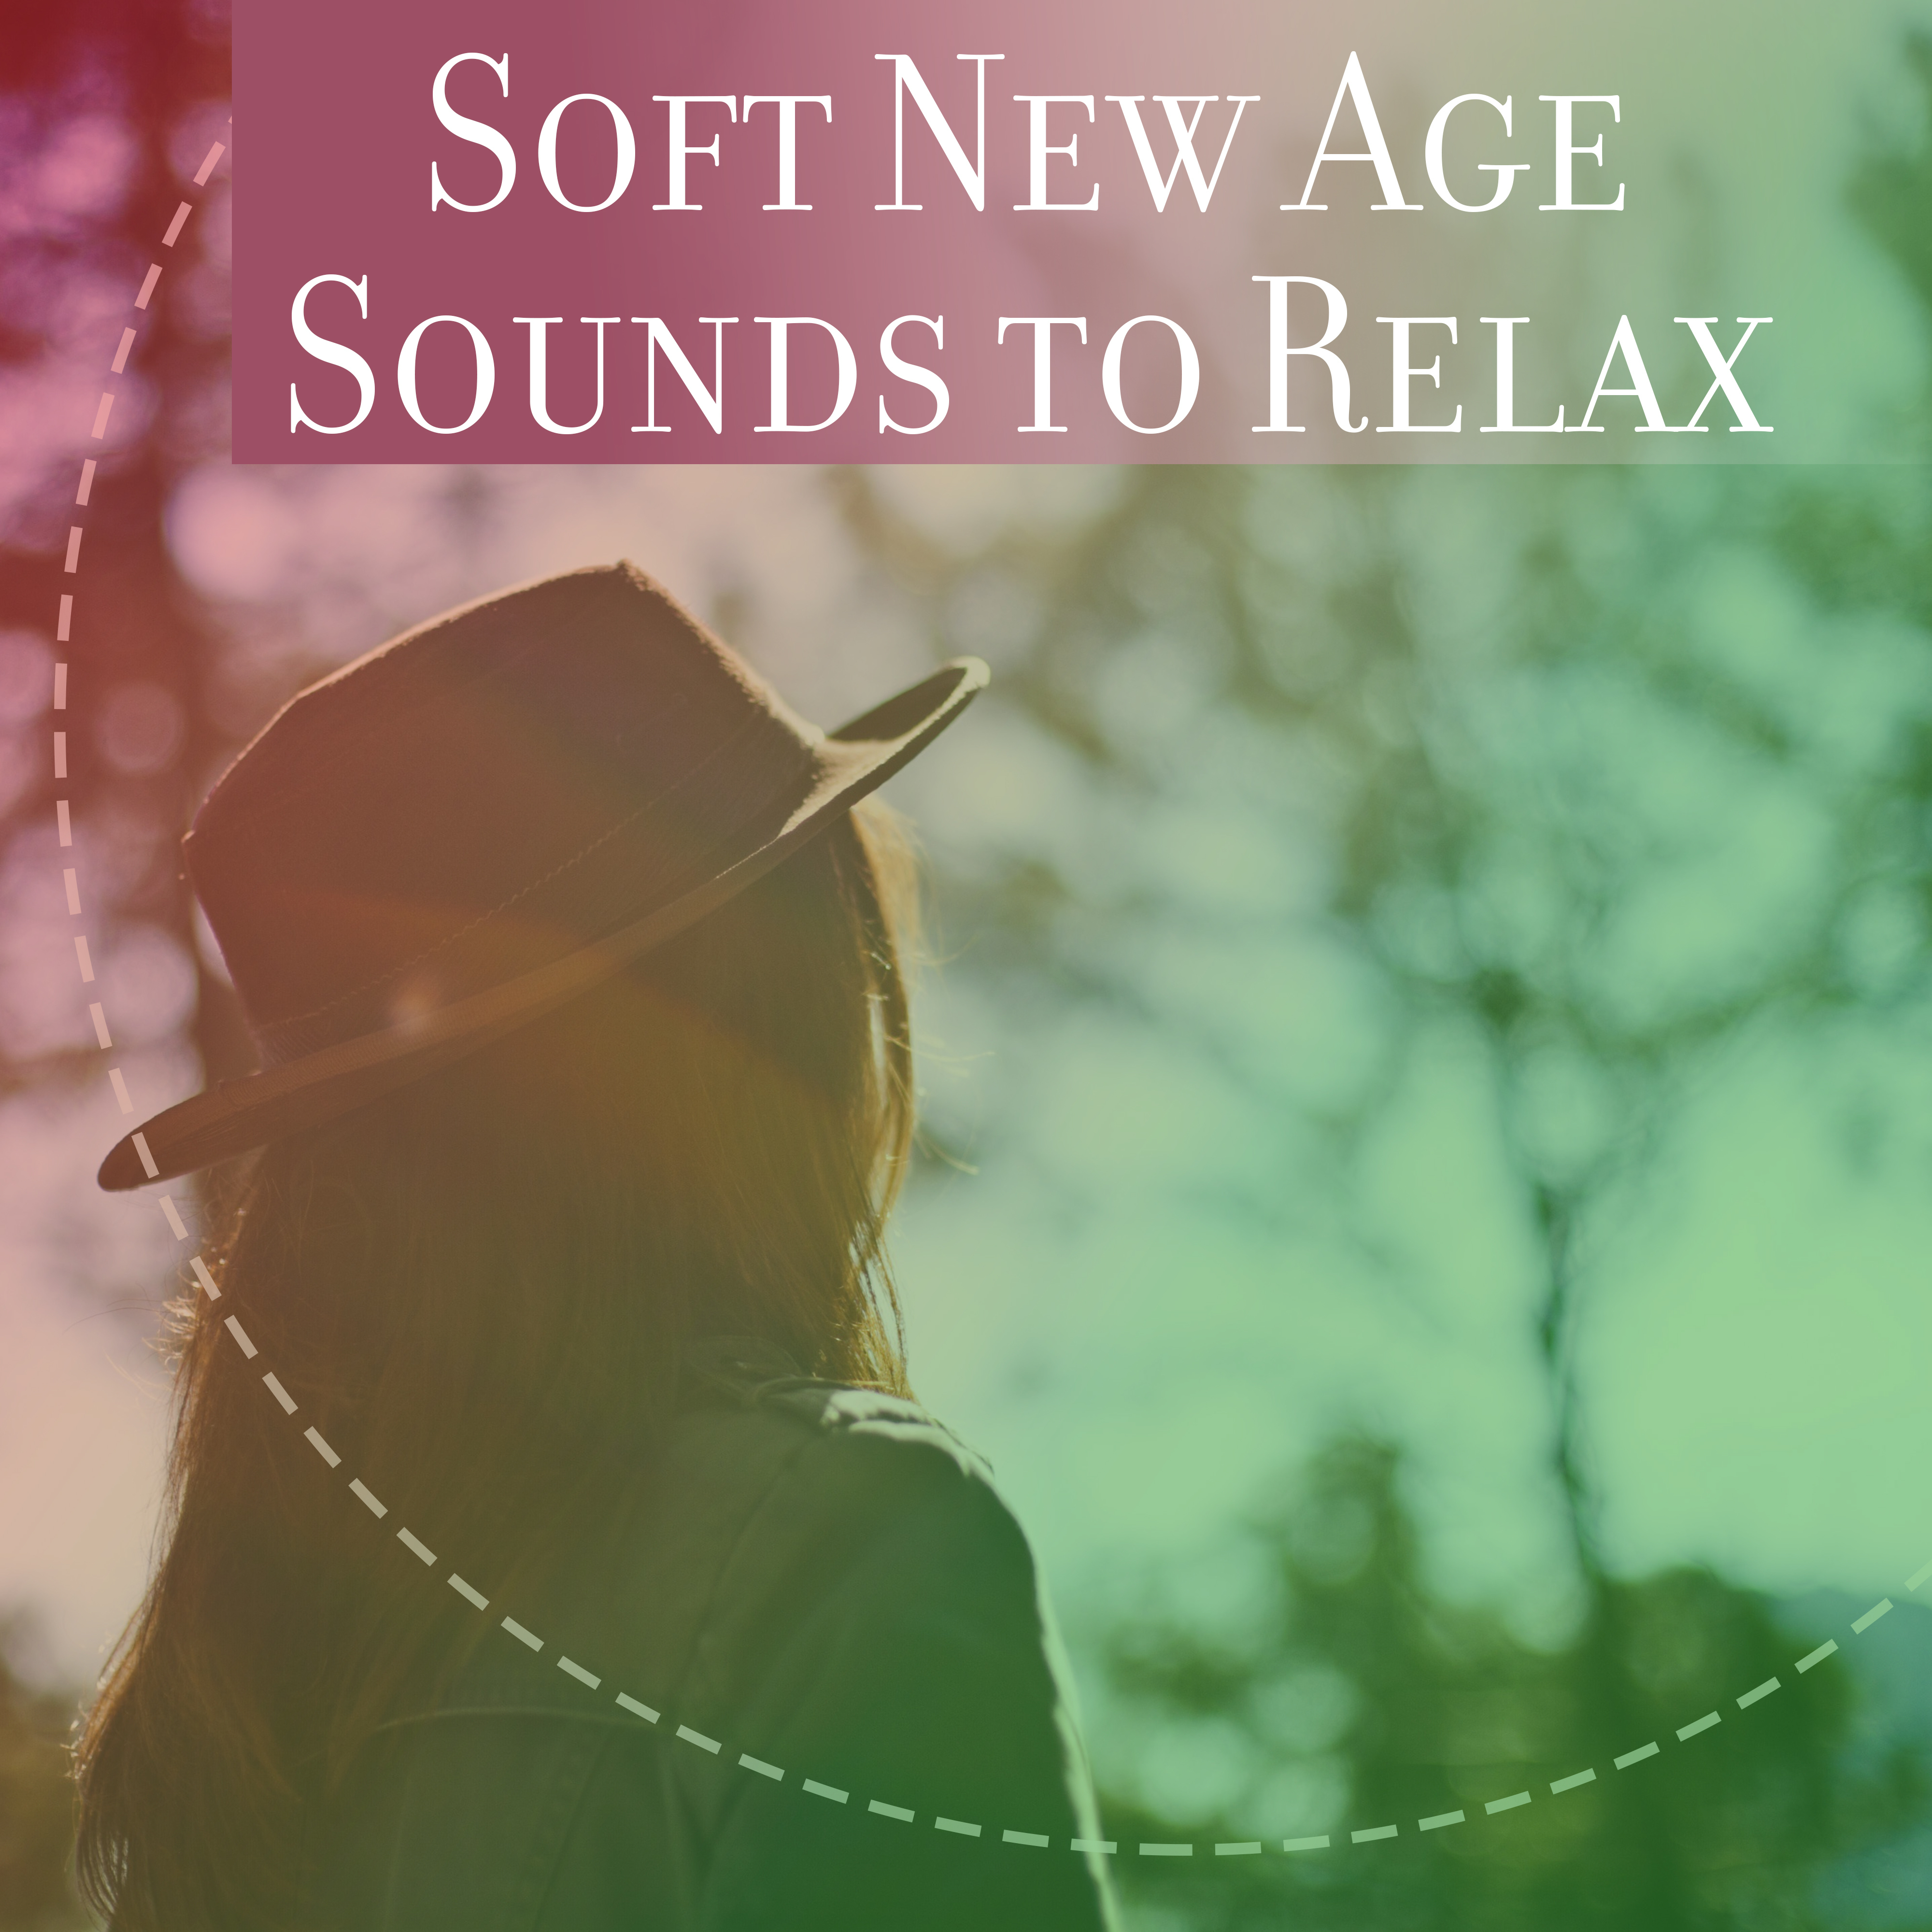 Soft New Age Sounds to Relax  Stress Relief, Calm Sounds, Easy Listening, Soothing Waves